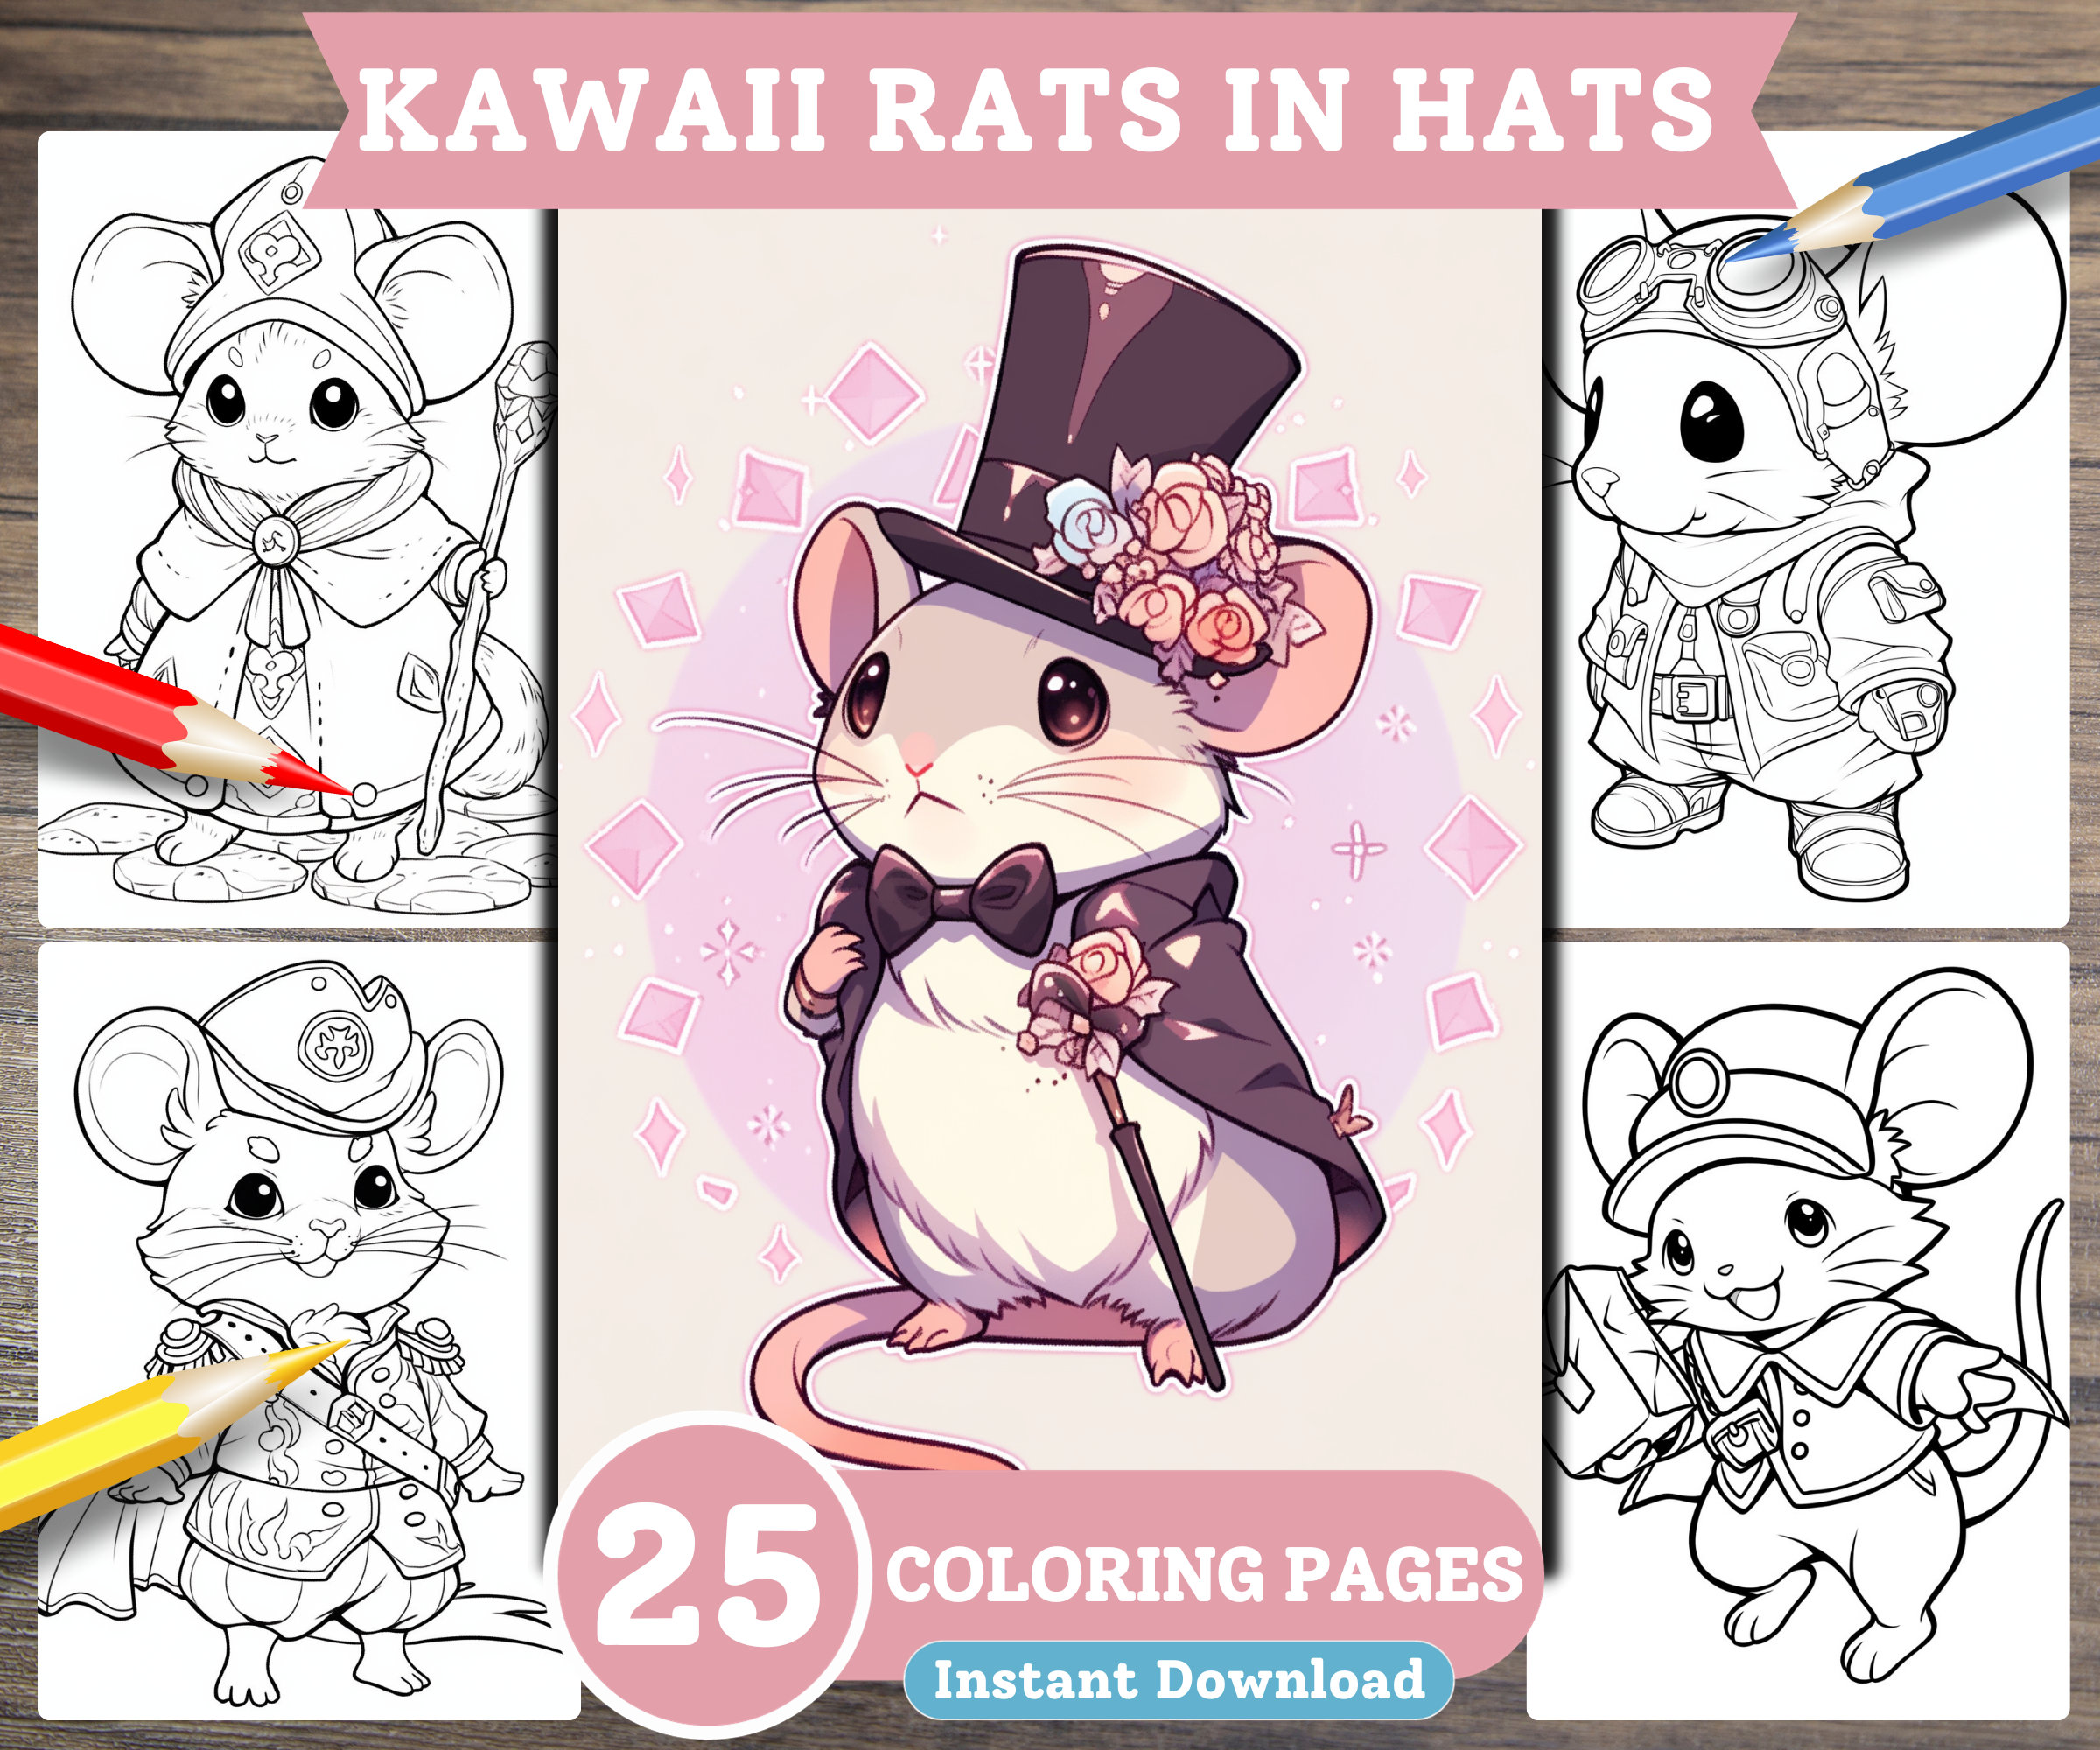 Cute kawaii rats in hats grayscale coloring book pages for adults for kids digital file instant download pdf coloring printable coloring